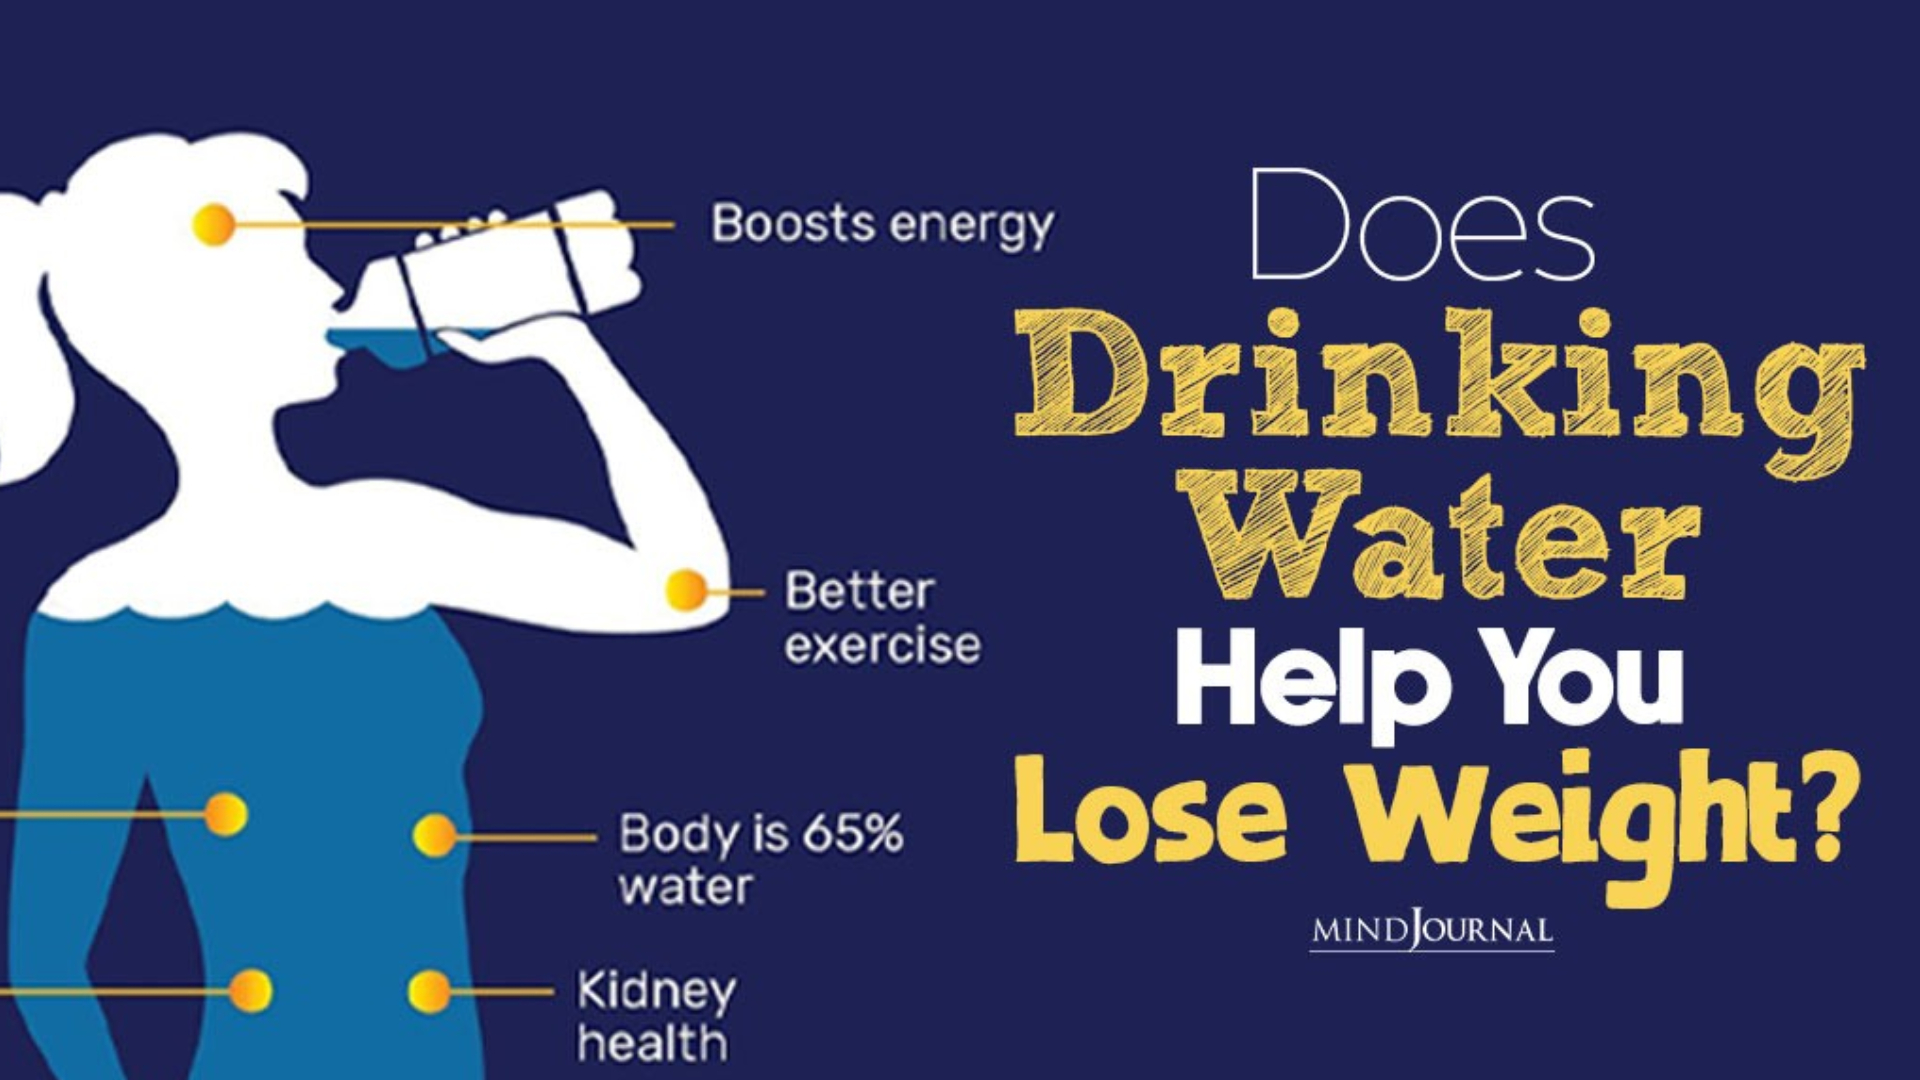 Does Drinking Water Help You Lose Weight? image